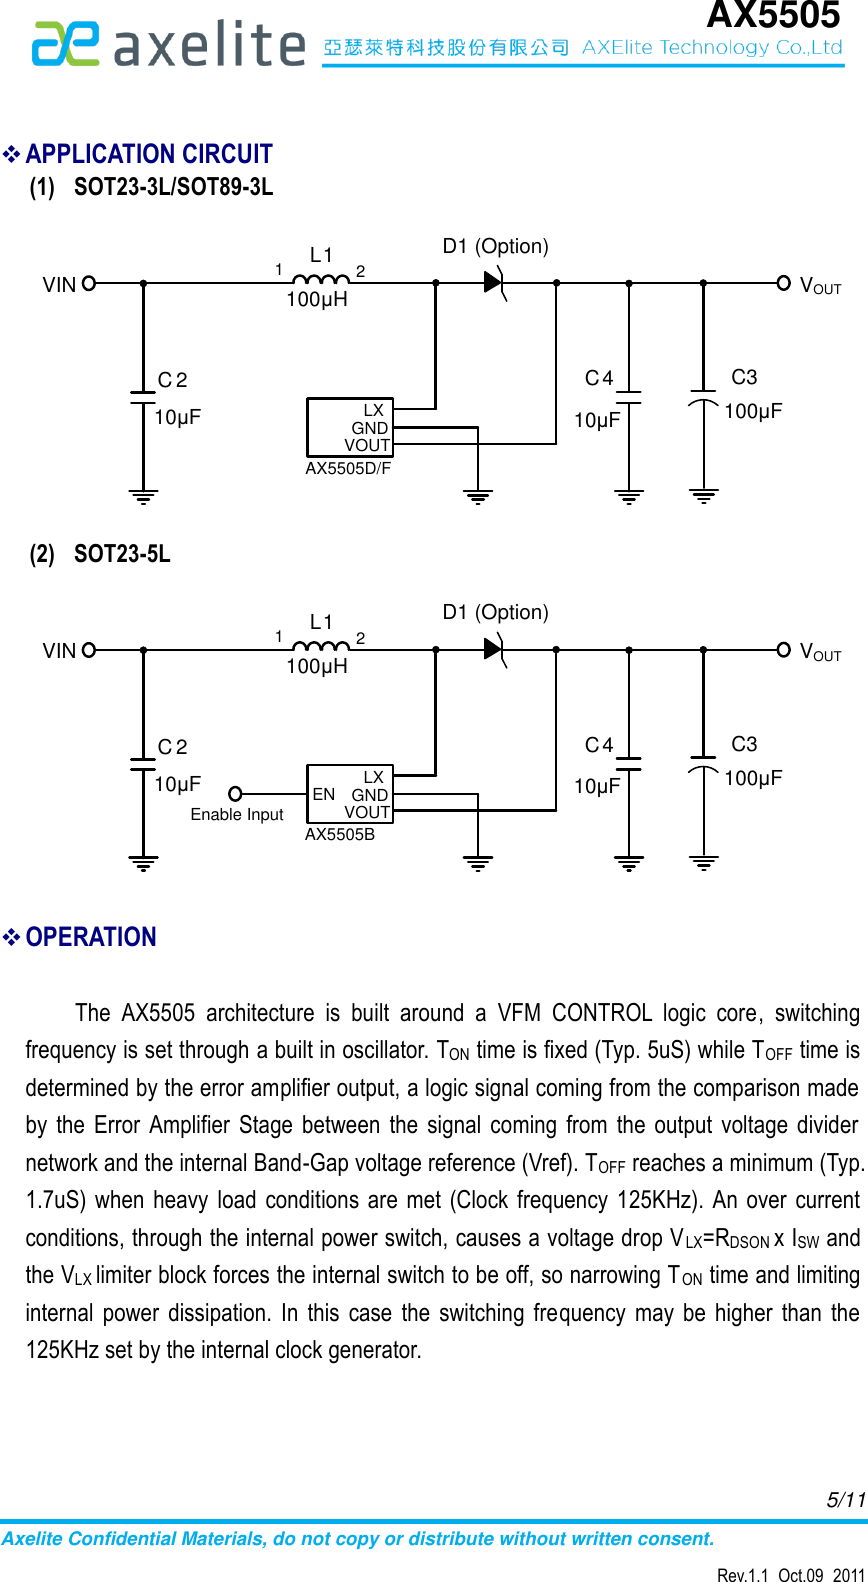 Page 5 of 12 - AX5505 - Datasheet. Www.s-manuals.com. R1.1 Axelite